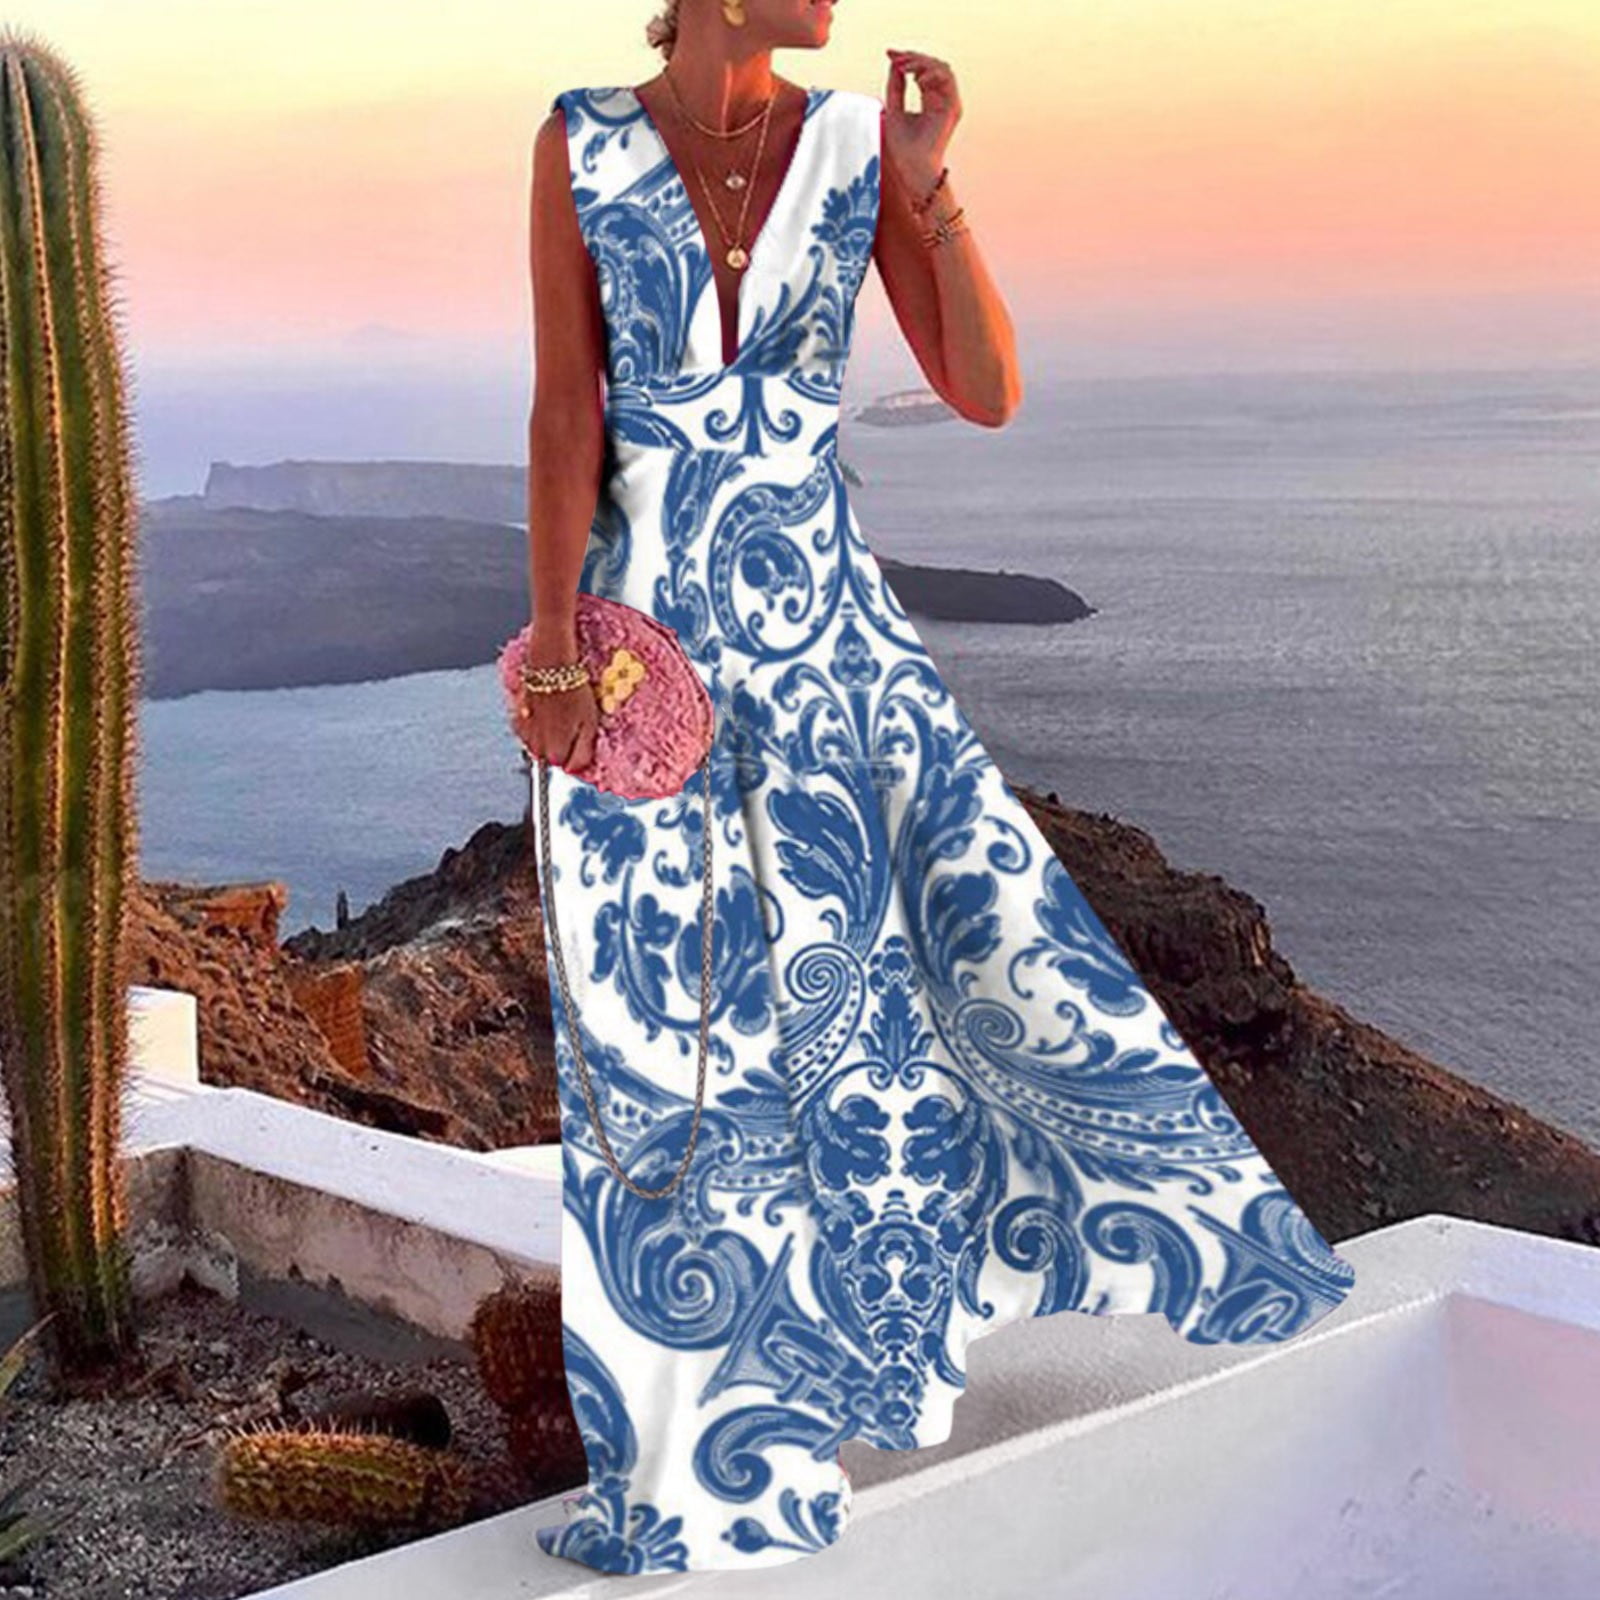 2021 Bohemian Style Lace Top Spaghetti Strap Chiffon Boho Beach Wedding  Dress With Backless Design By Asaf Dadush From Penomise, $135.87 |  DHgate.Com